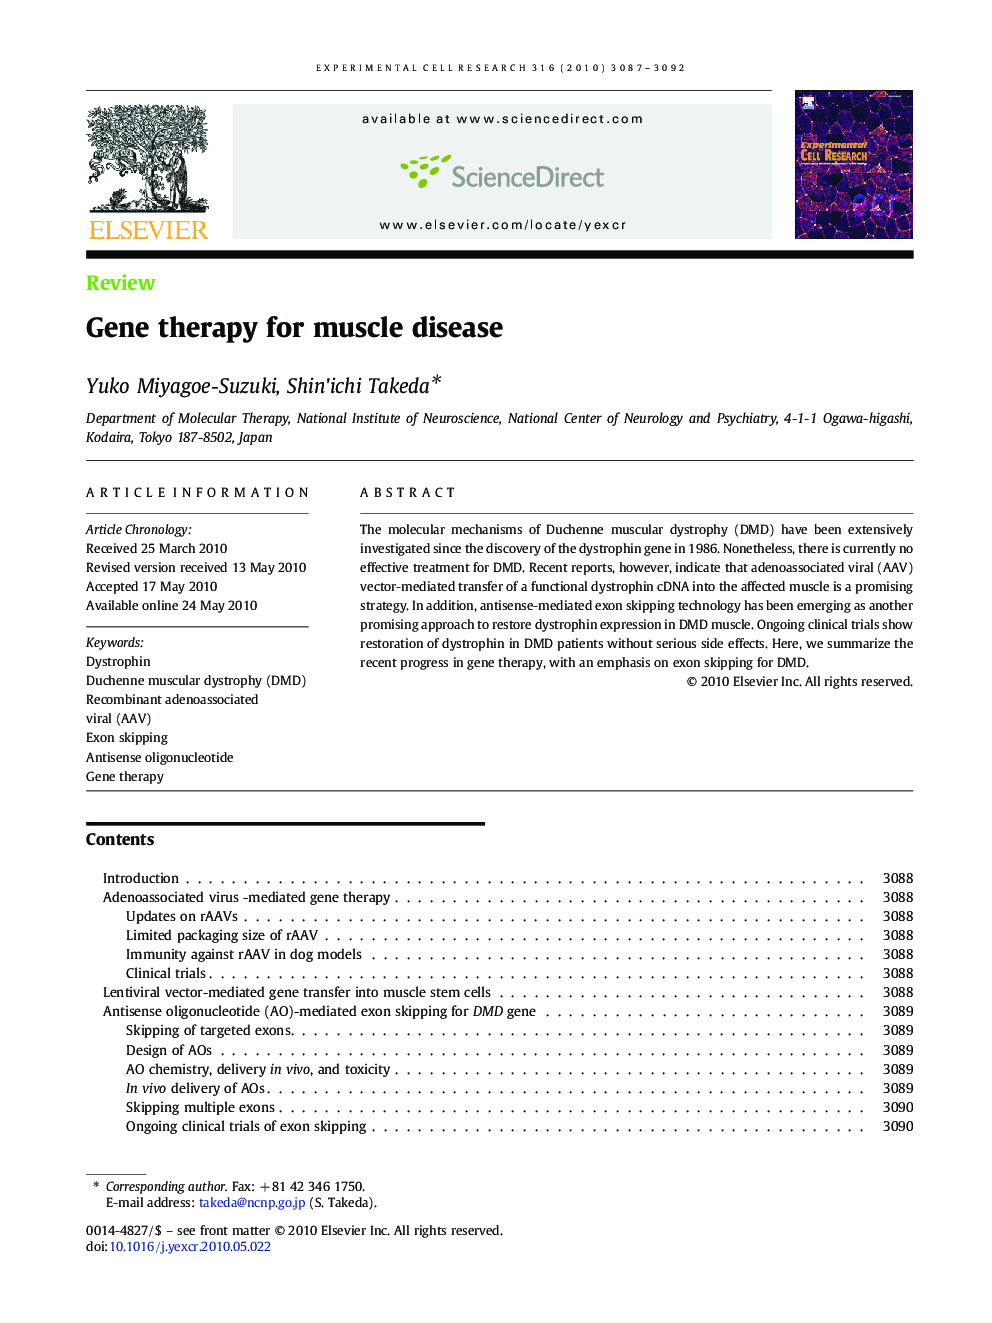 Gene therapy for muscle disease